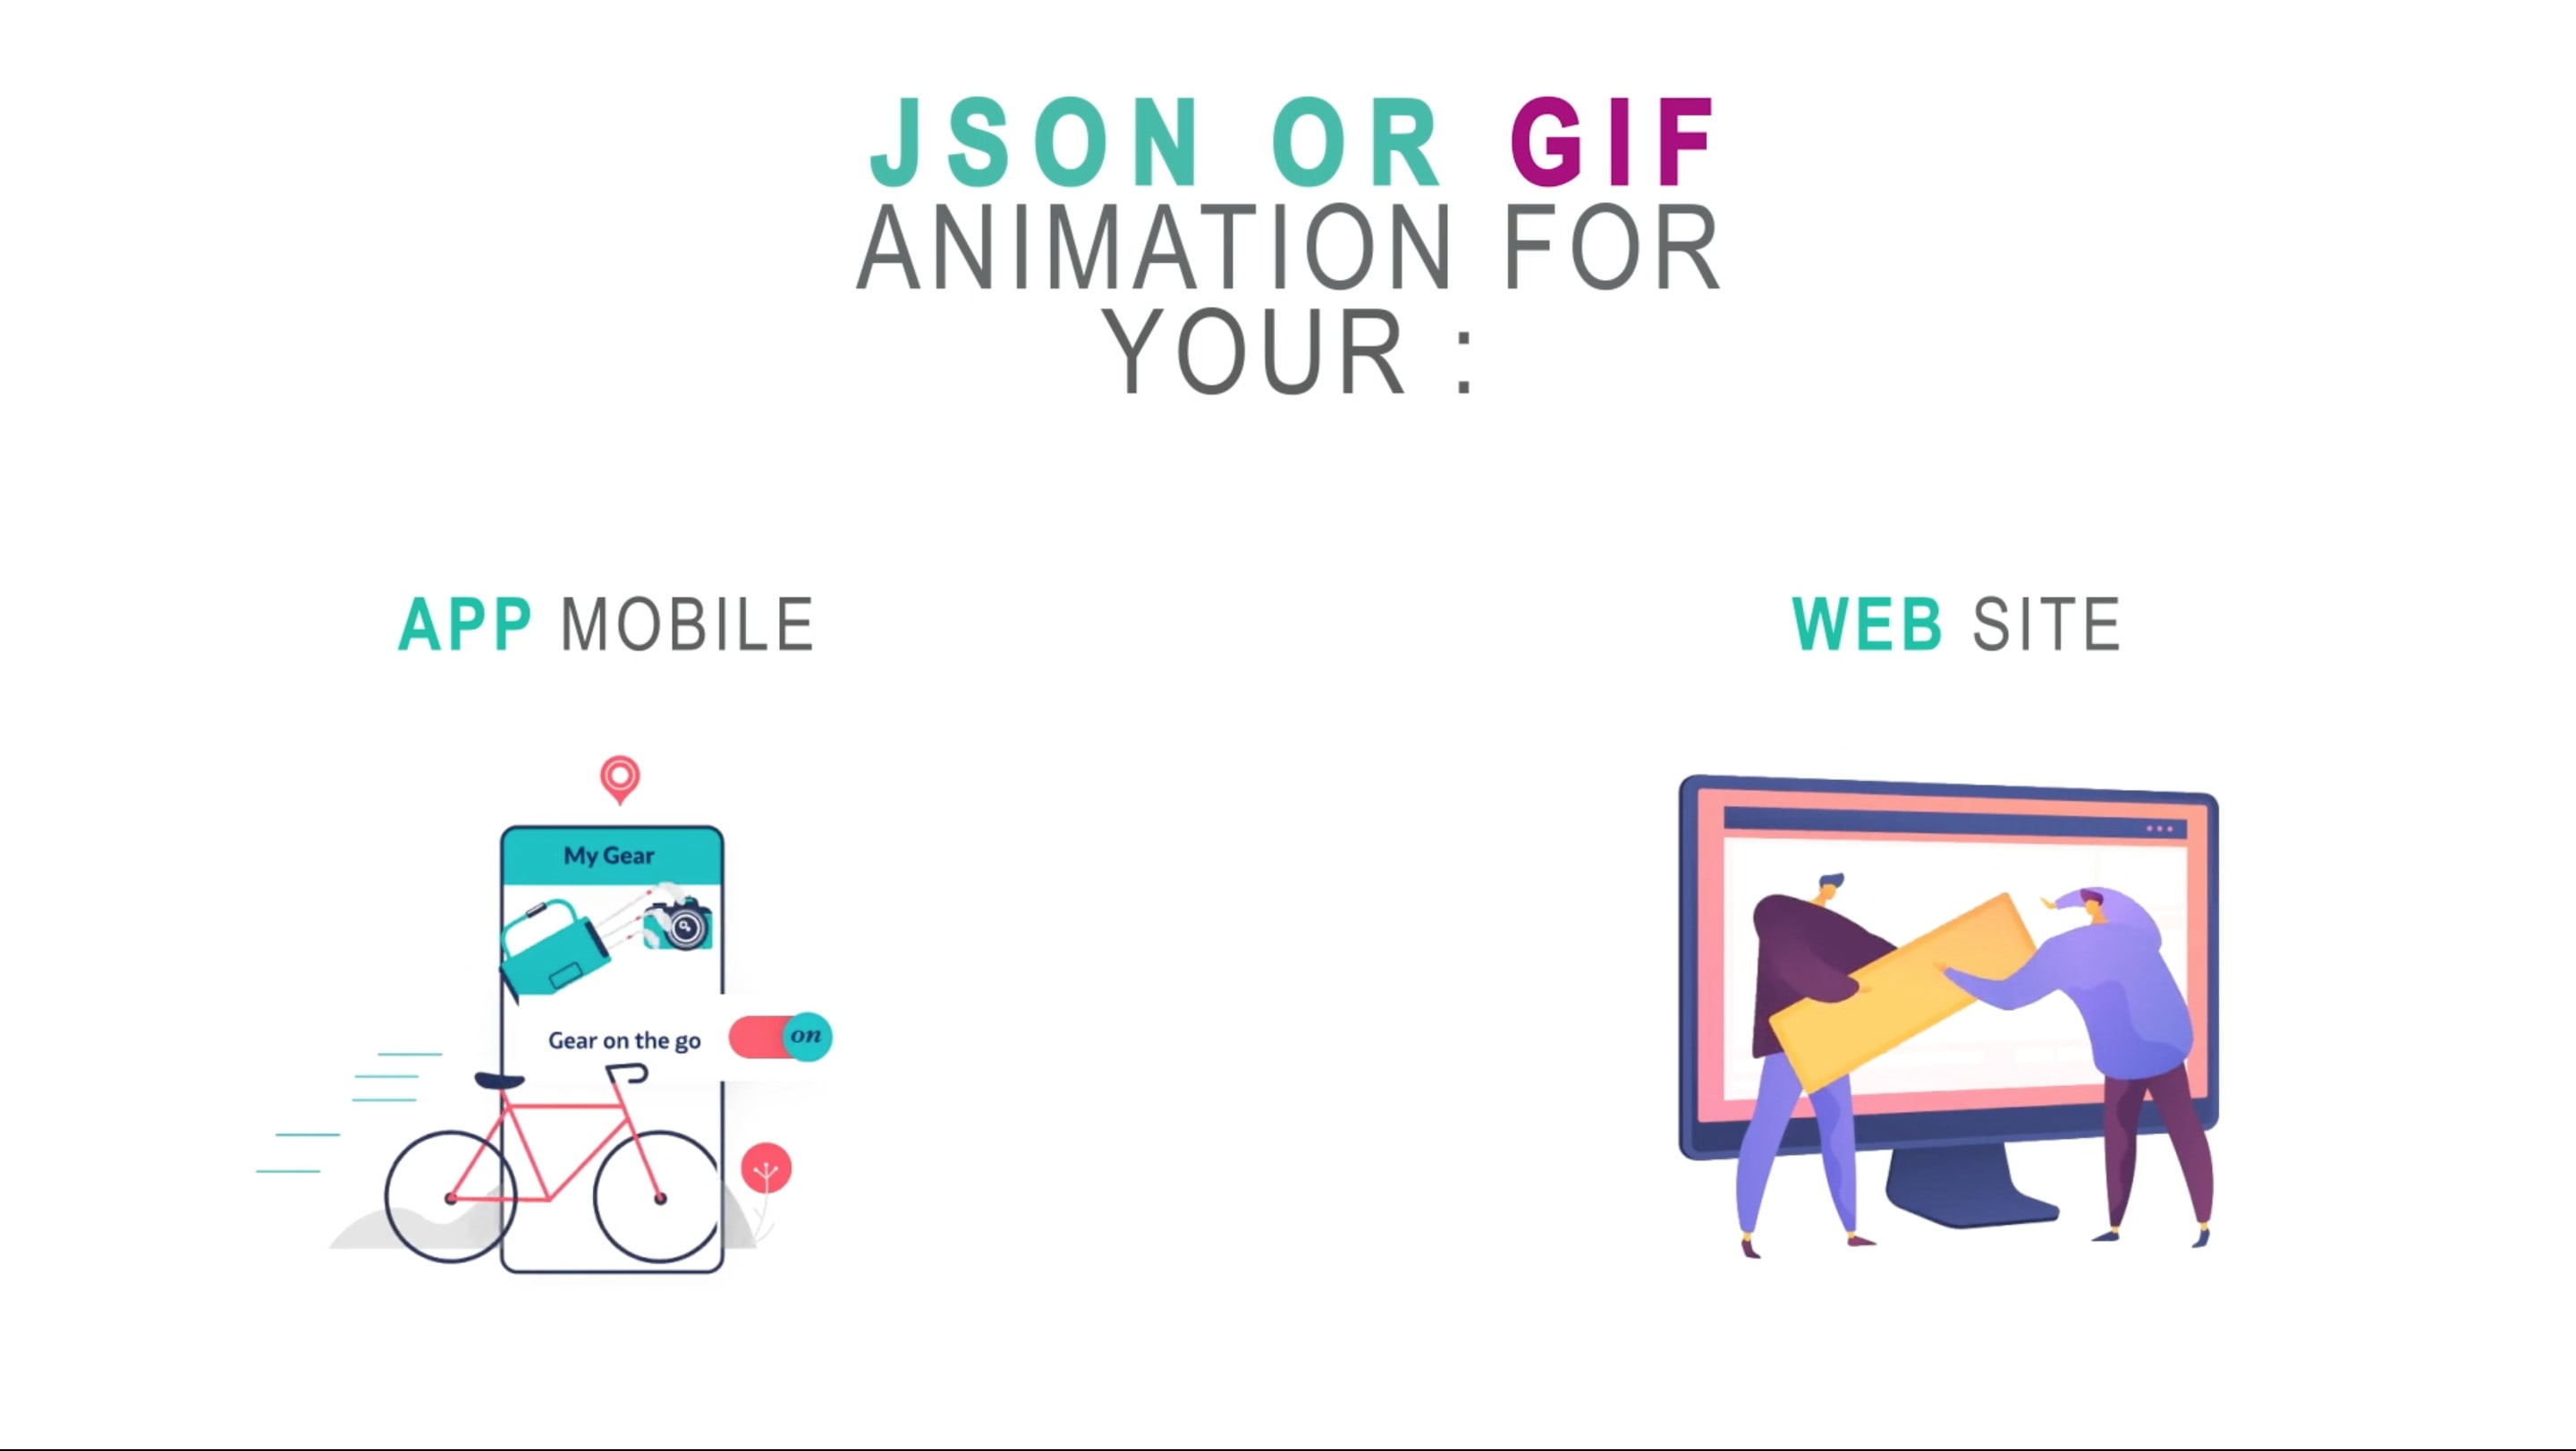 Download Design Animated Gif Or Lottie Json Svg Animation For Web And Mobile App By Shel Up Fiverr